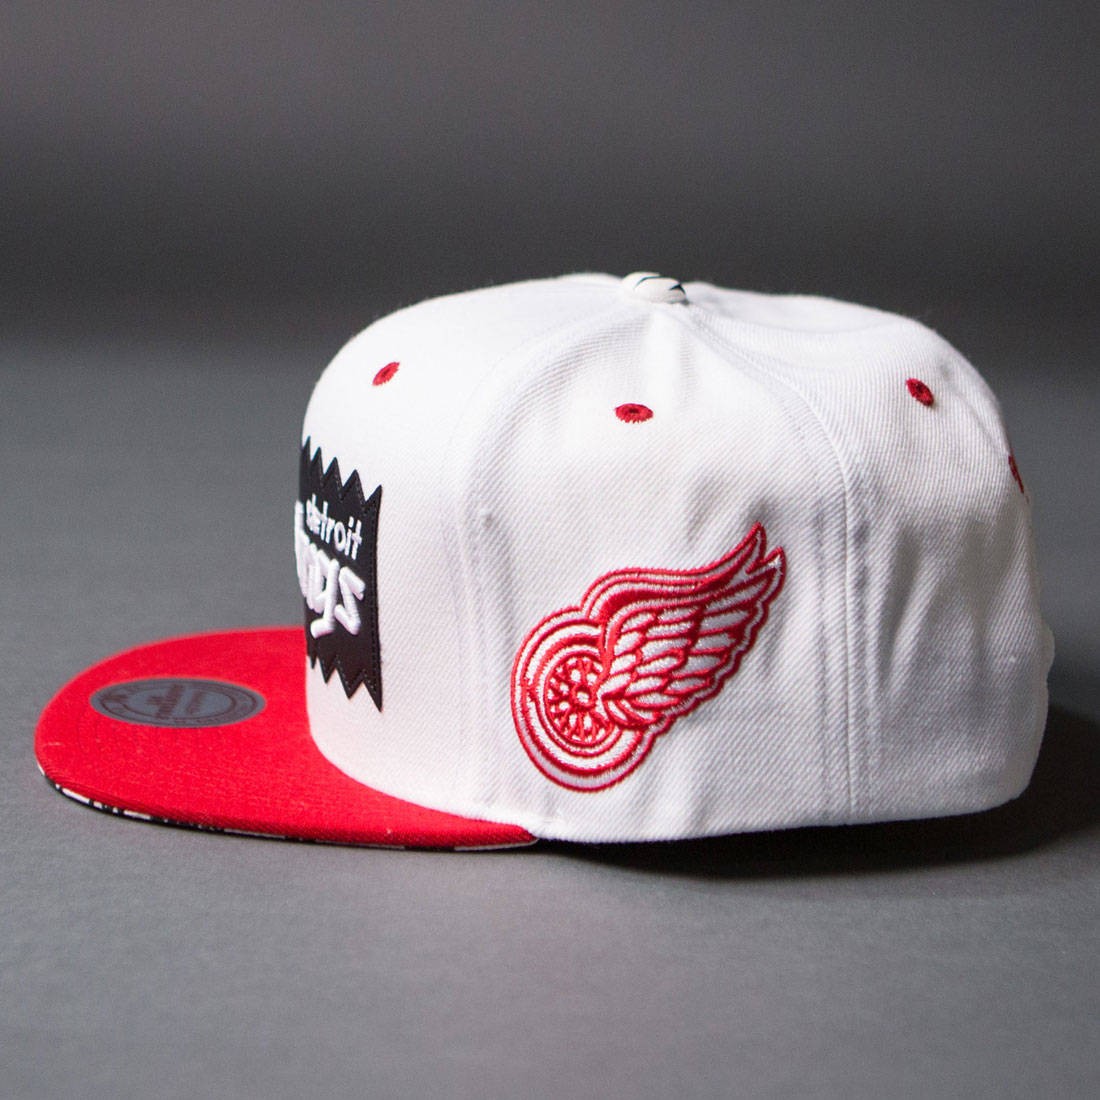 Mitchell & Ness Men's Mitchell & Ness White/Red Detroit Red Wings